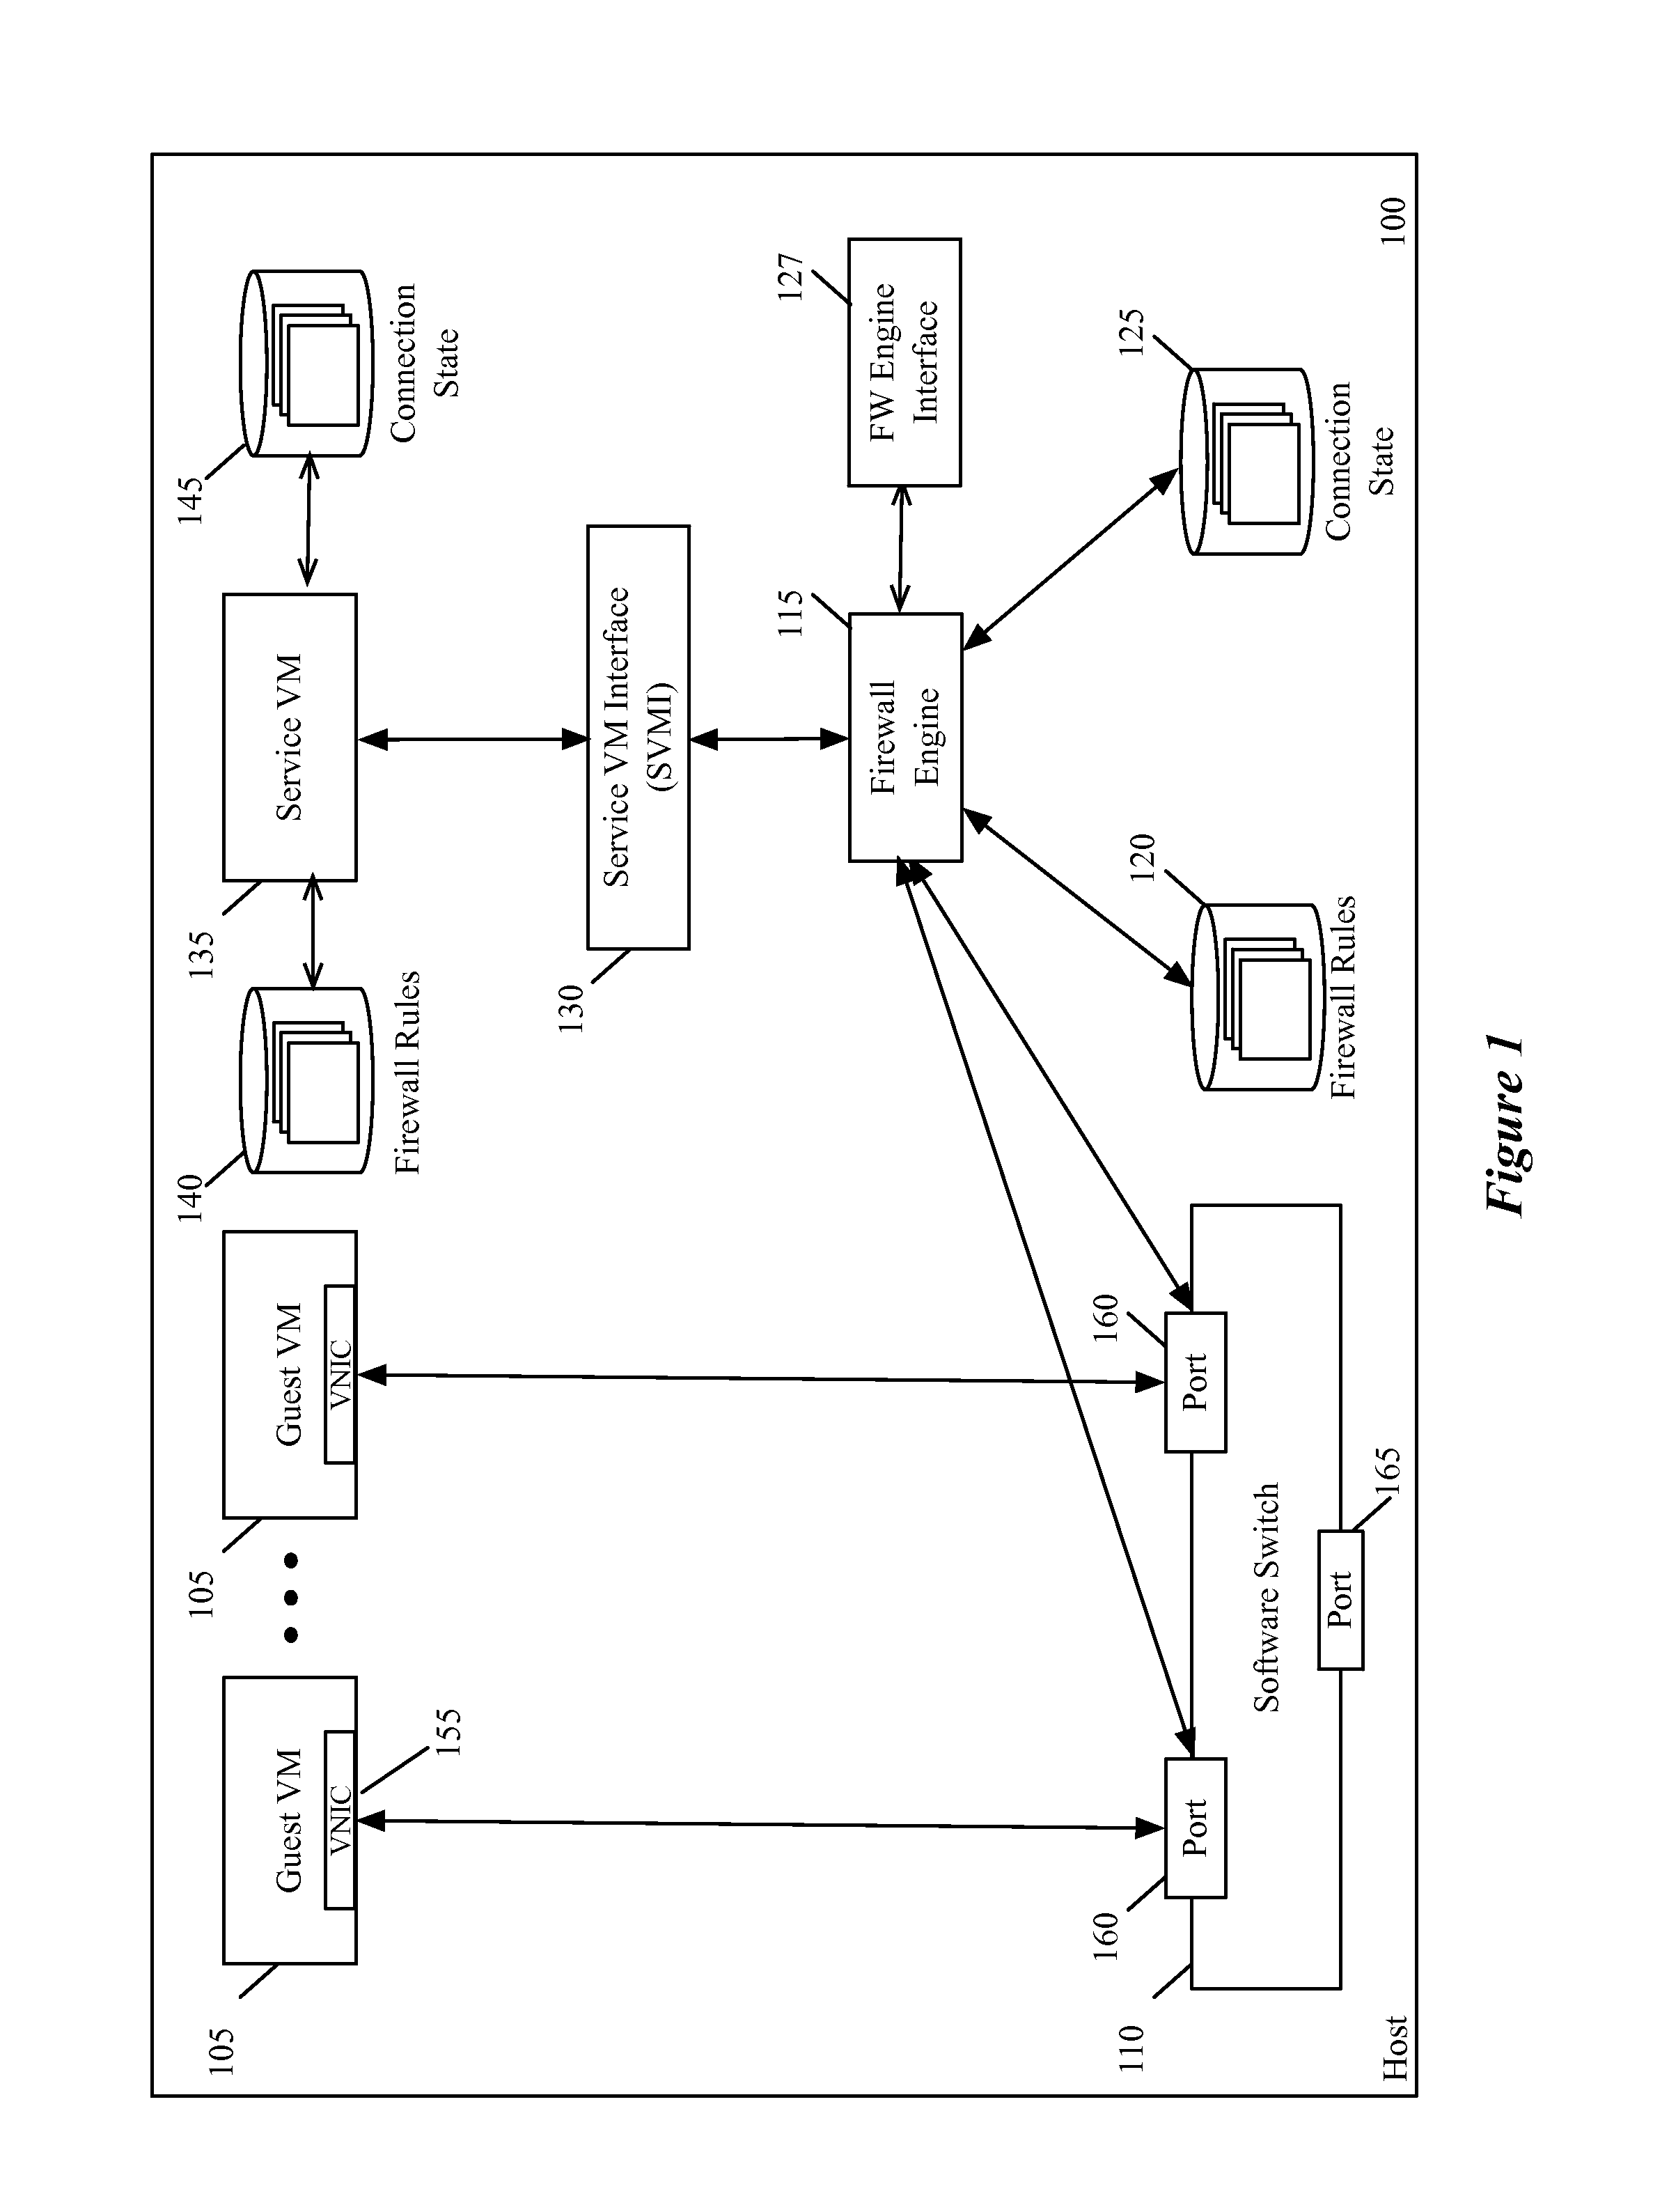 Migrating firewall connection state for a firewall service virtual machine